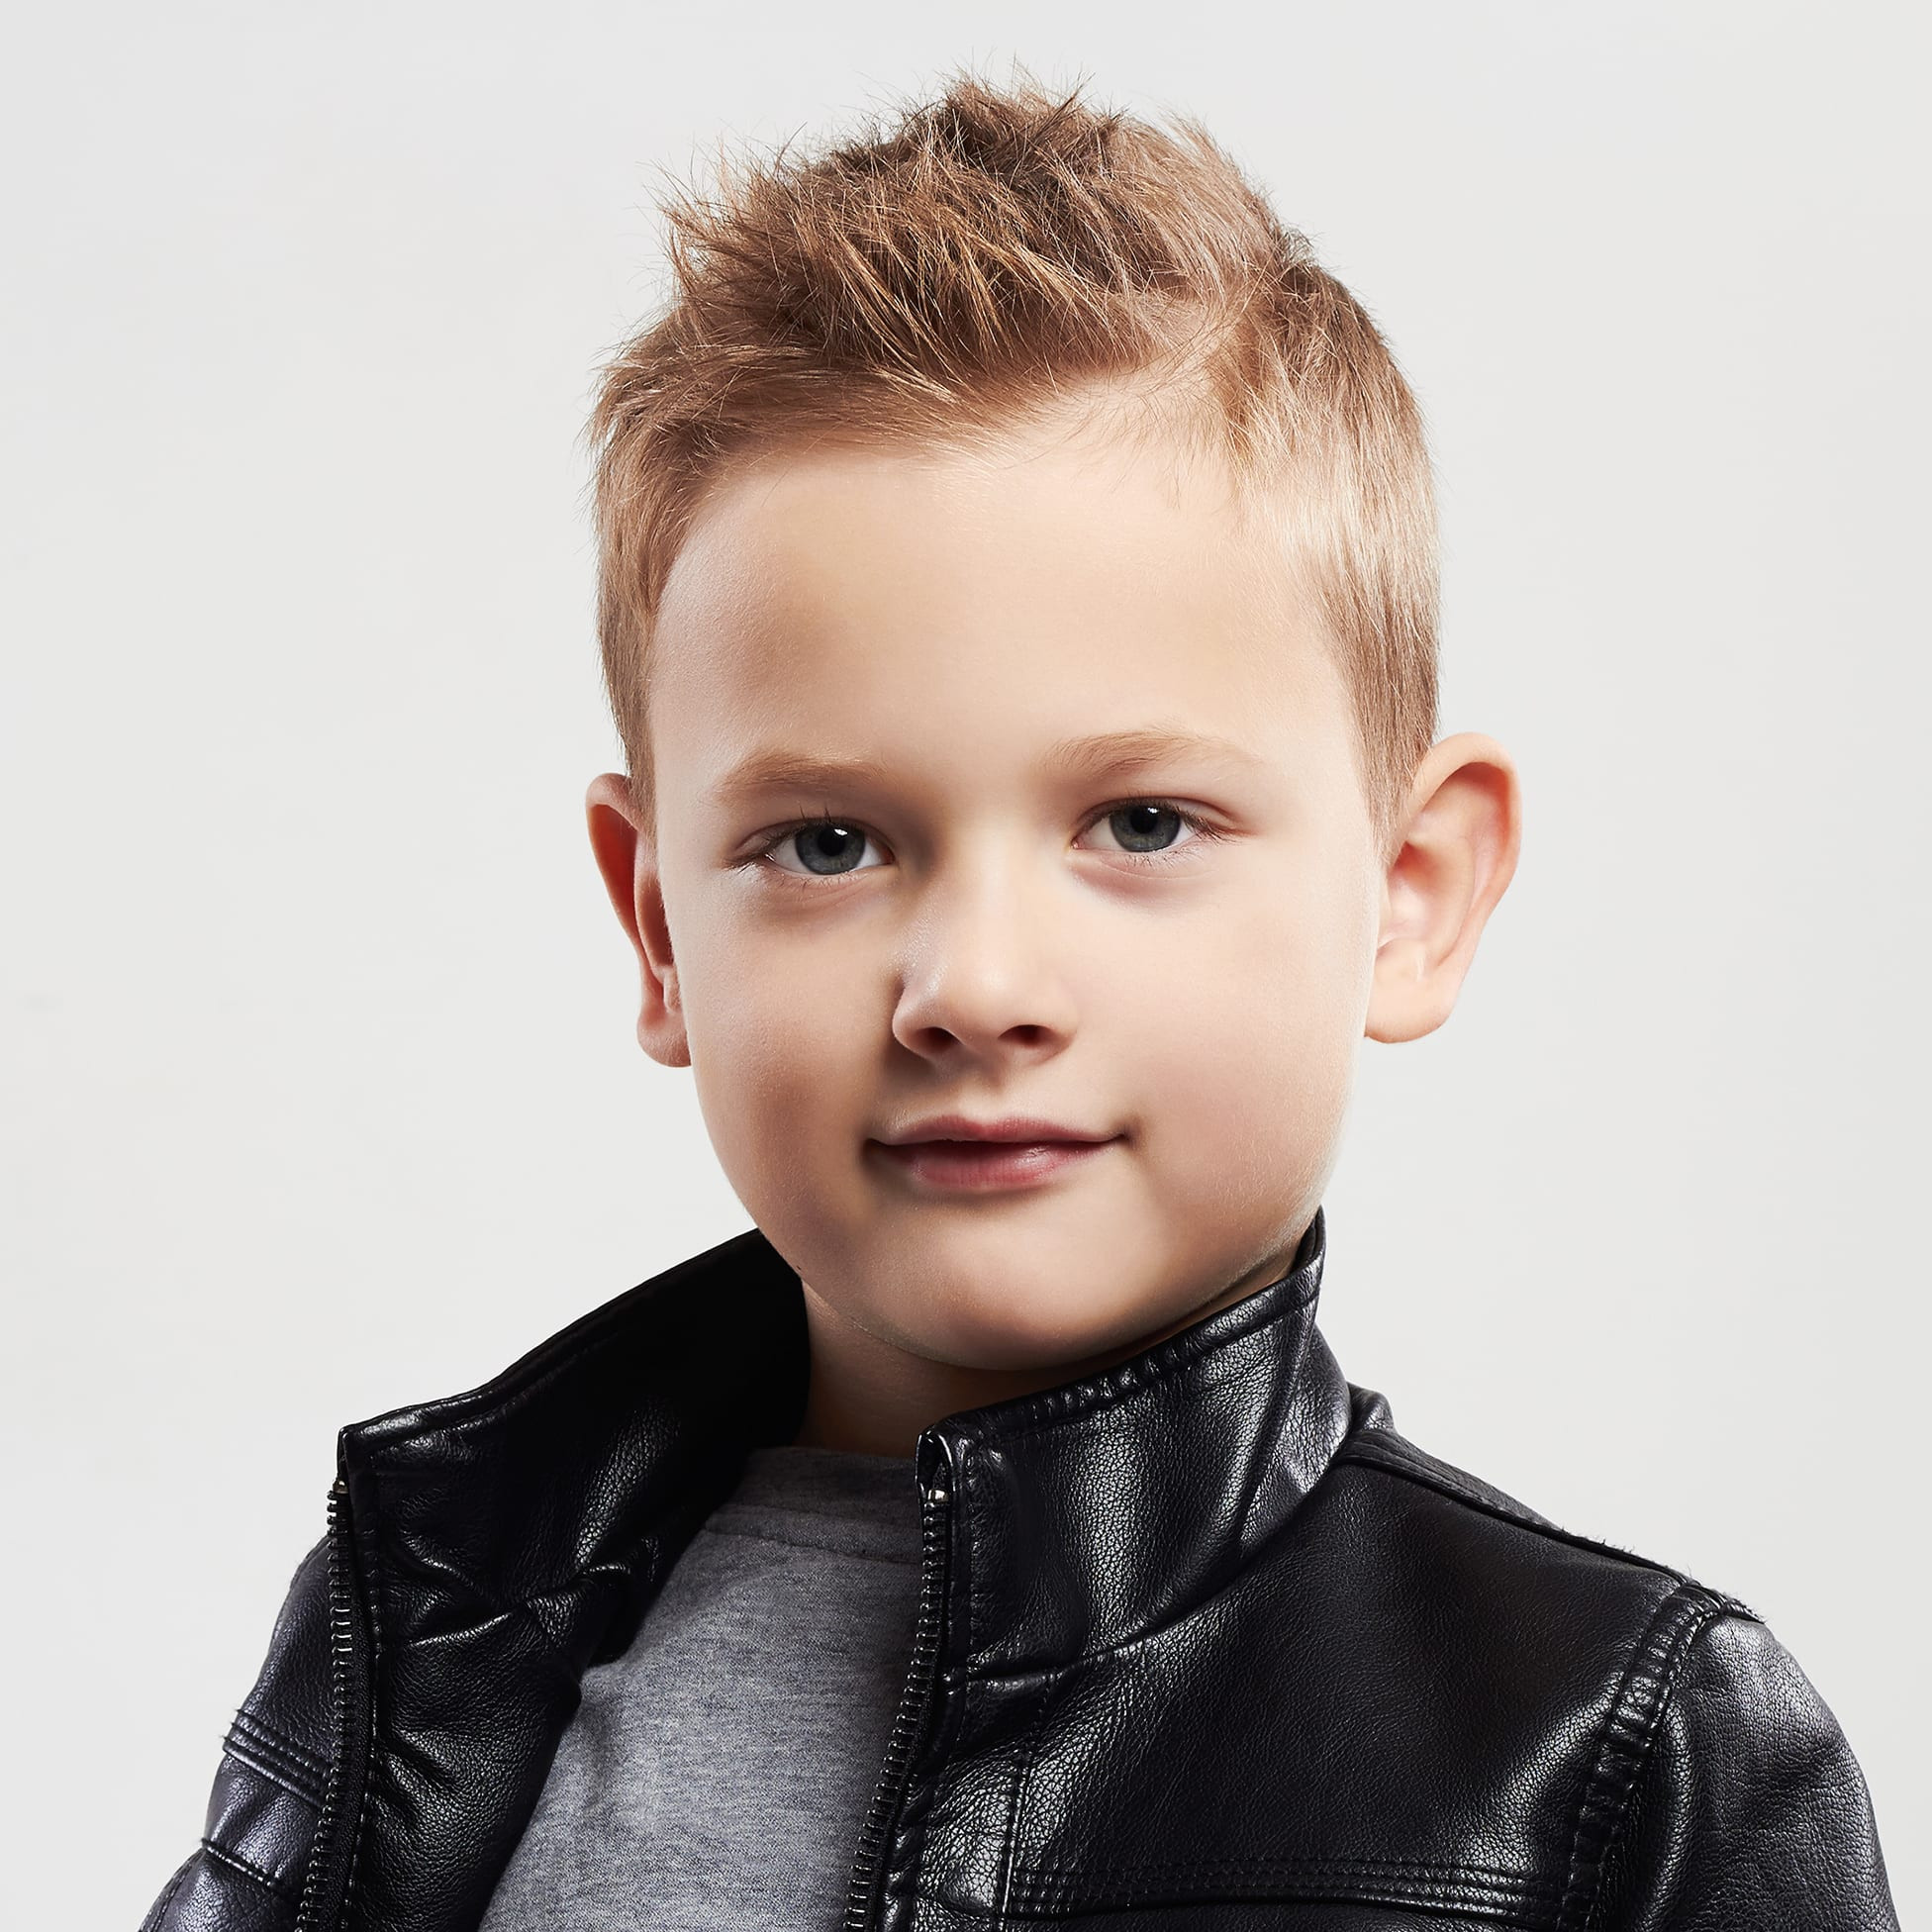 Boy Haircuts Pictures
 40 Excellent School Haircuts for Boys Styling Tips